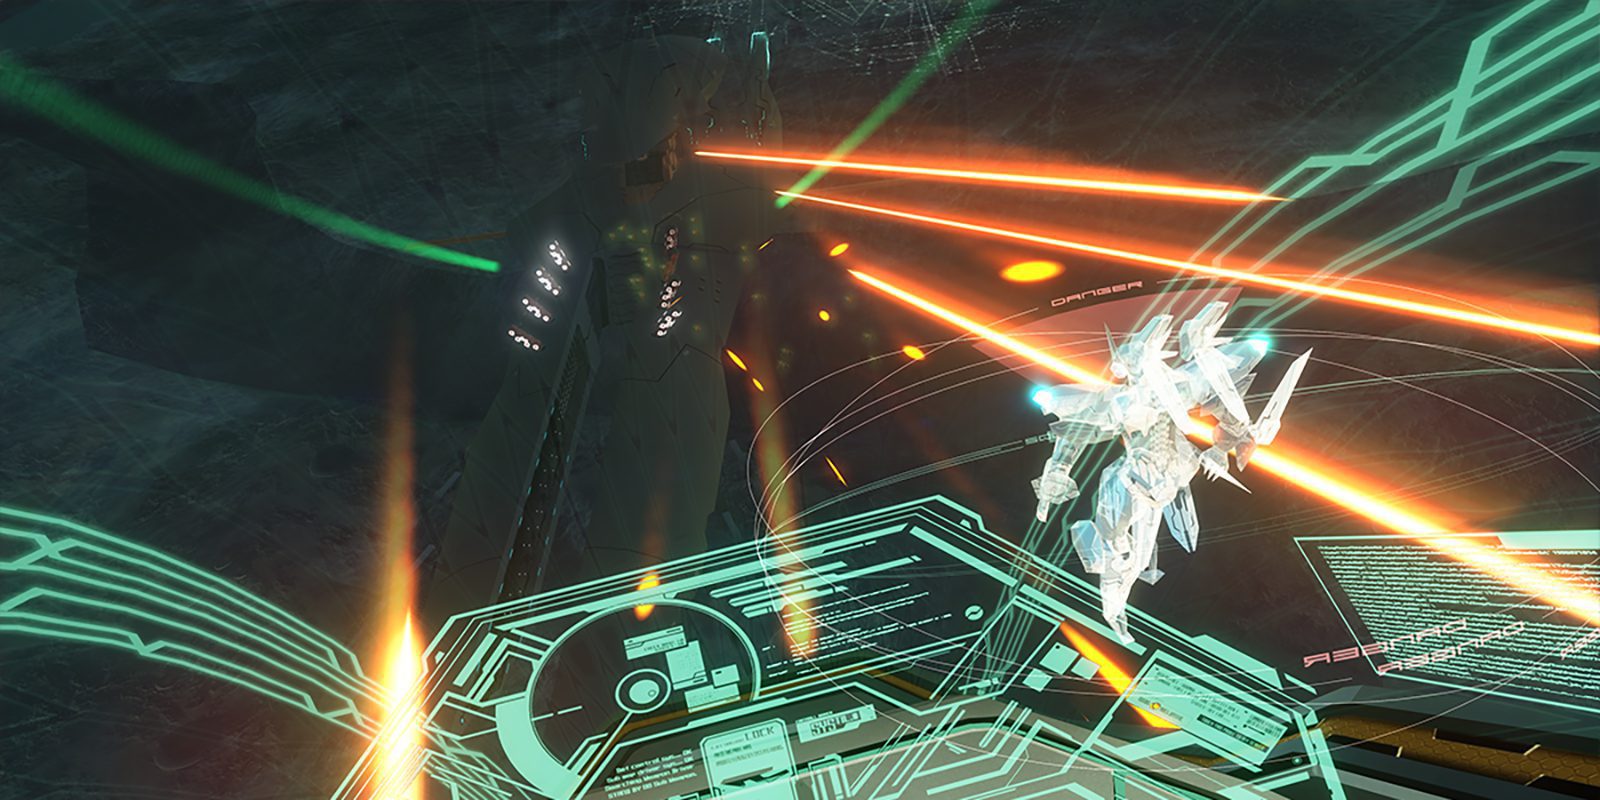 TGS 2017: Konami recupera 'Zone of the Enders: The 2nd Runner' para PC, PS4 y PSVR